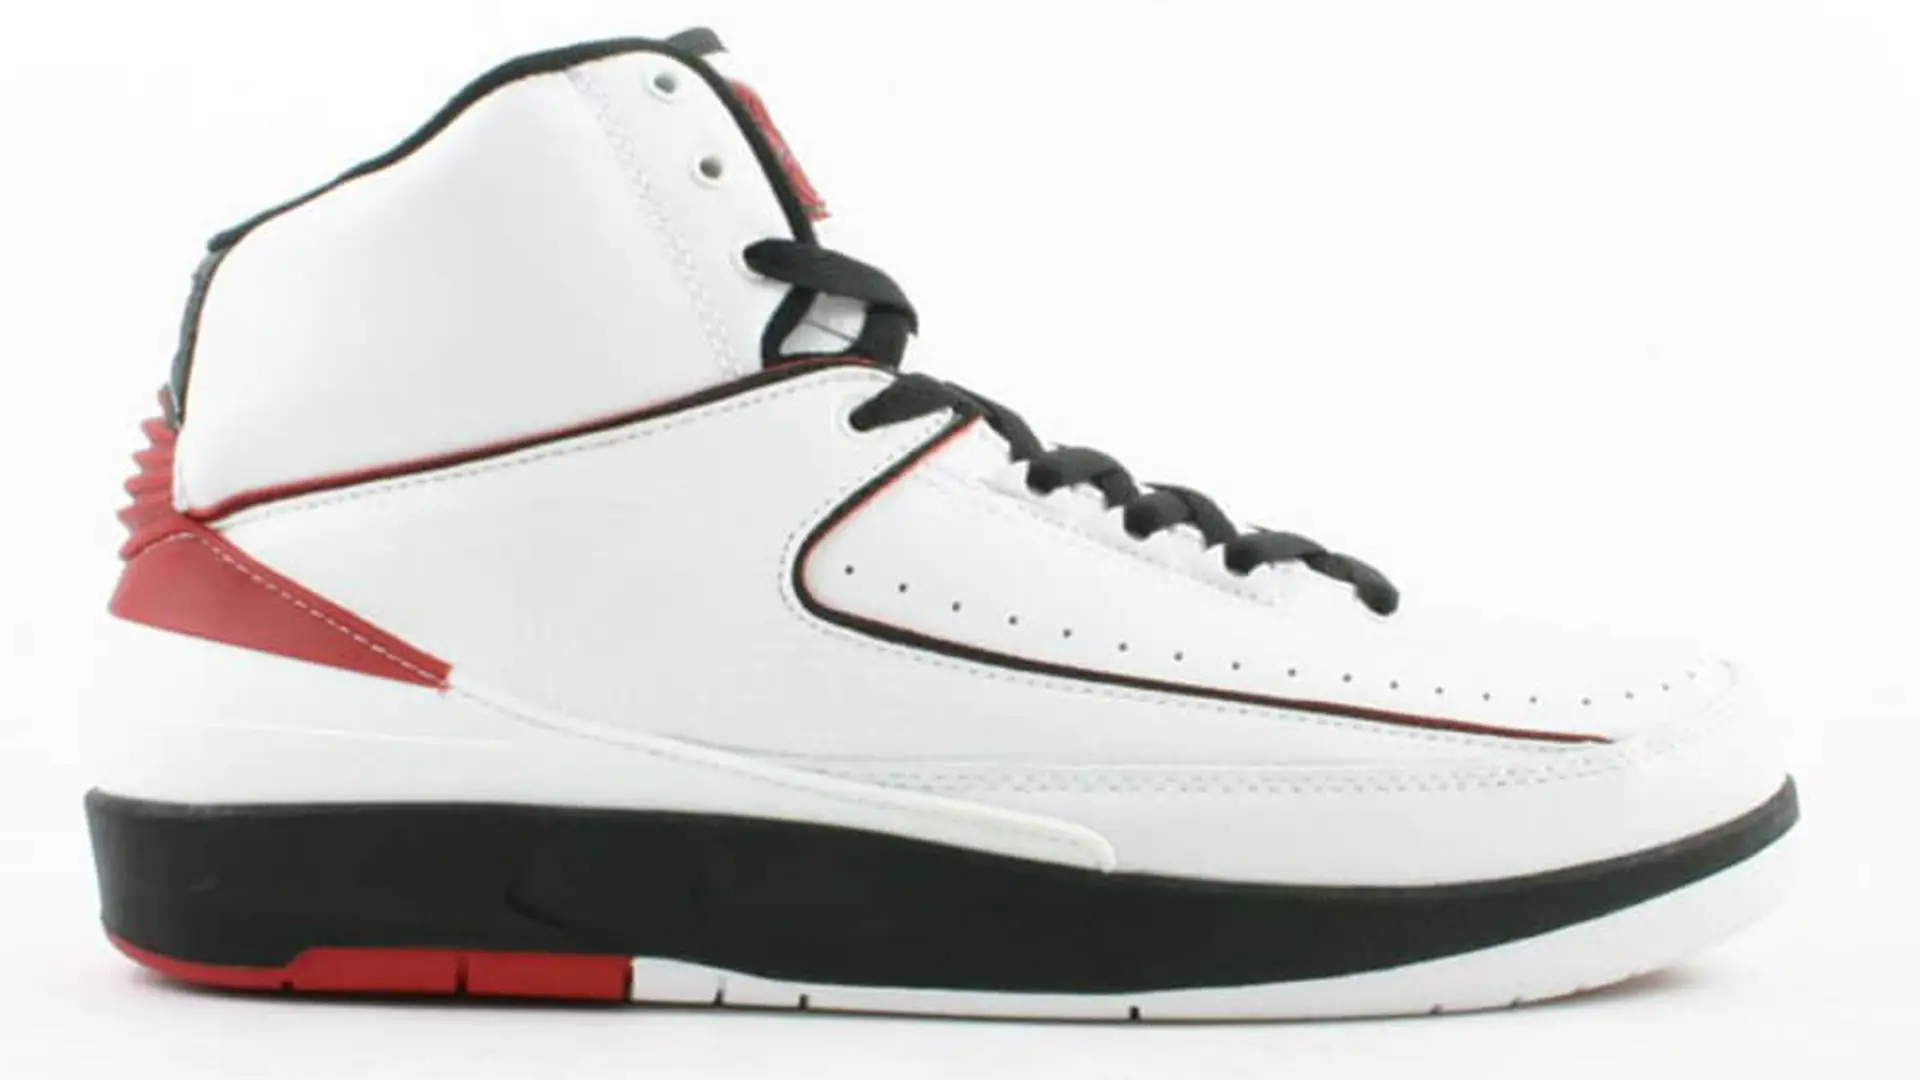 Why are Air Jordans so valuable?